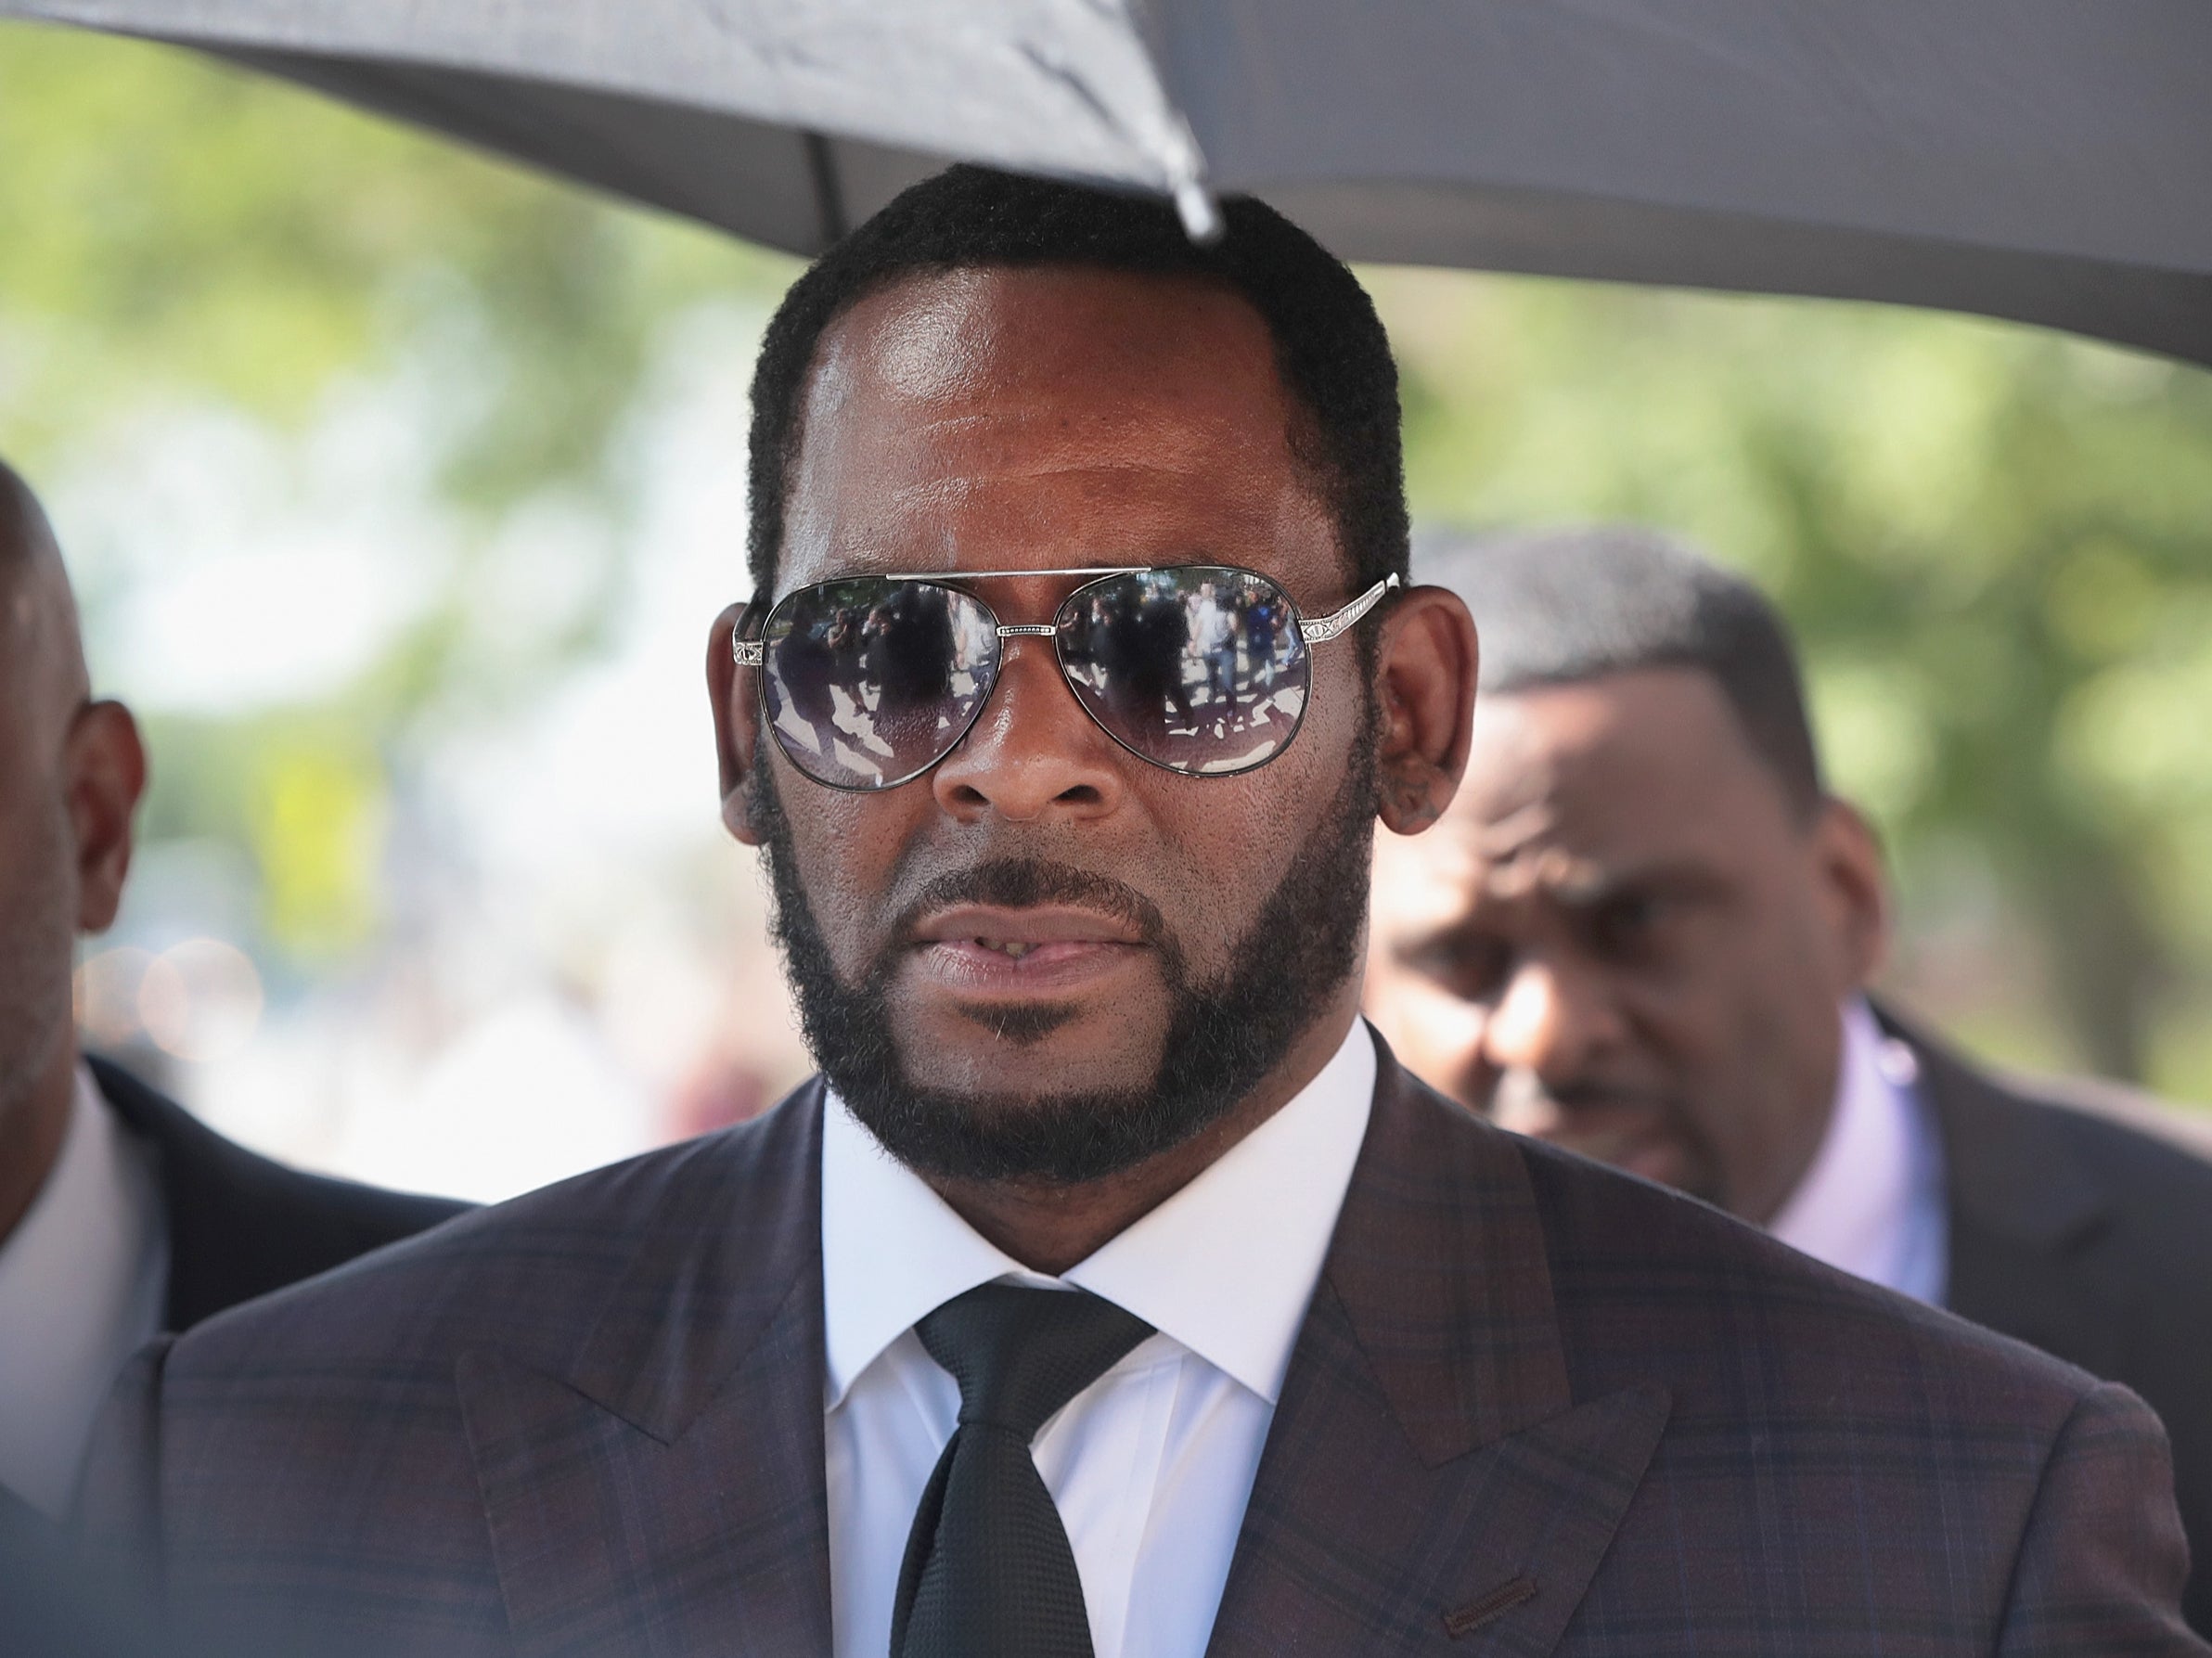 R Kelly leaves the Leighton Criminal Courts Building on 26 June 2019 in Chicago, Illinois